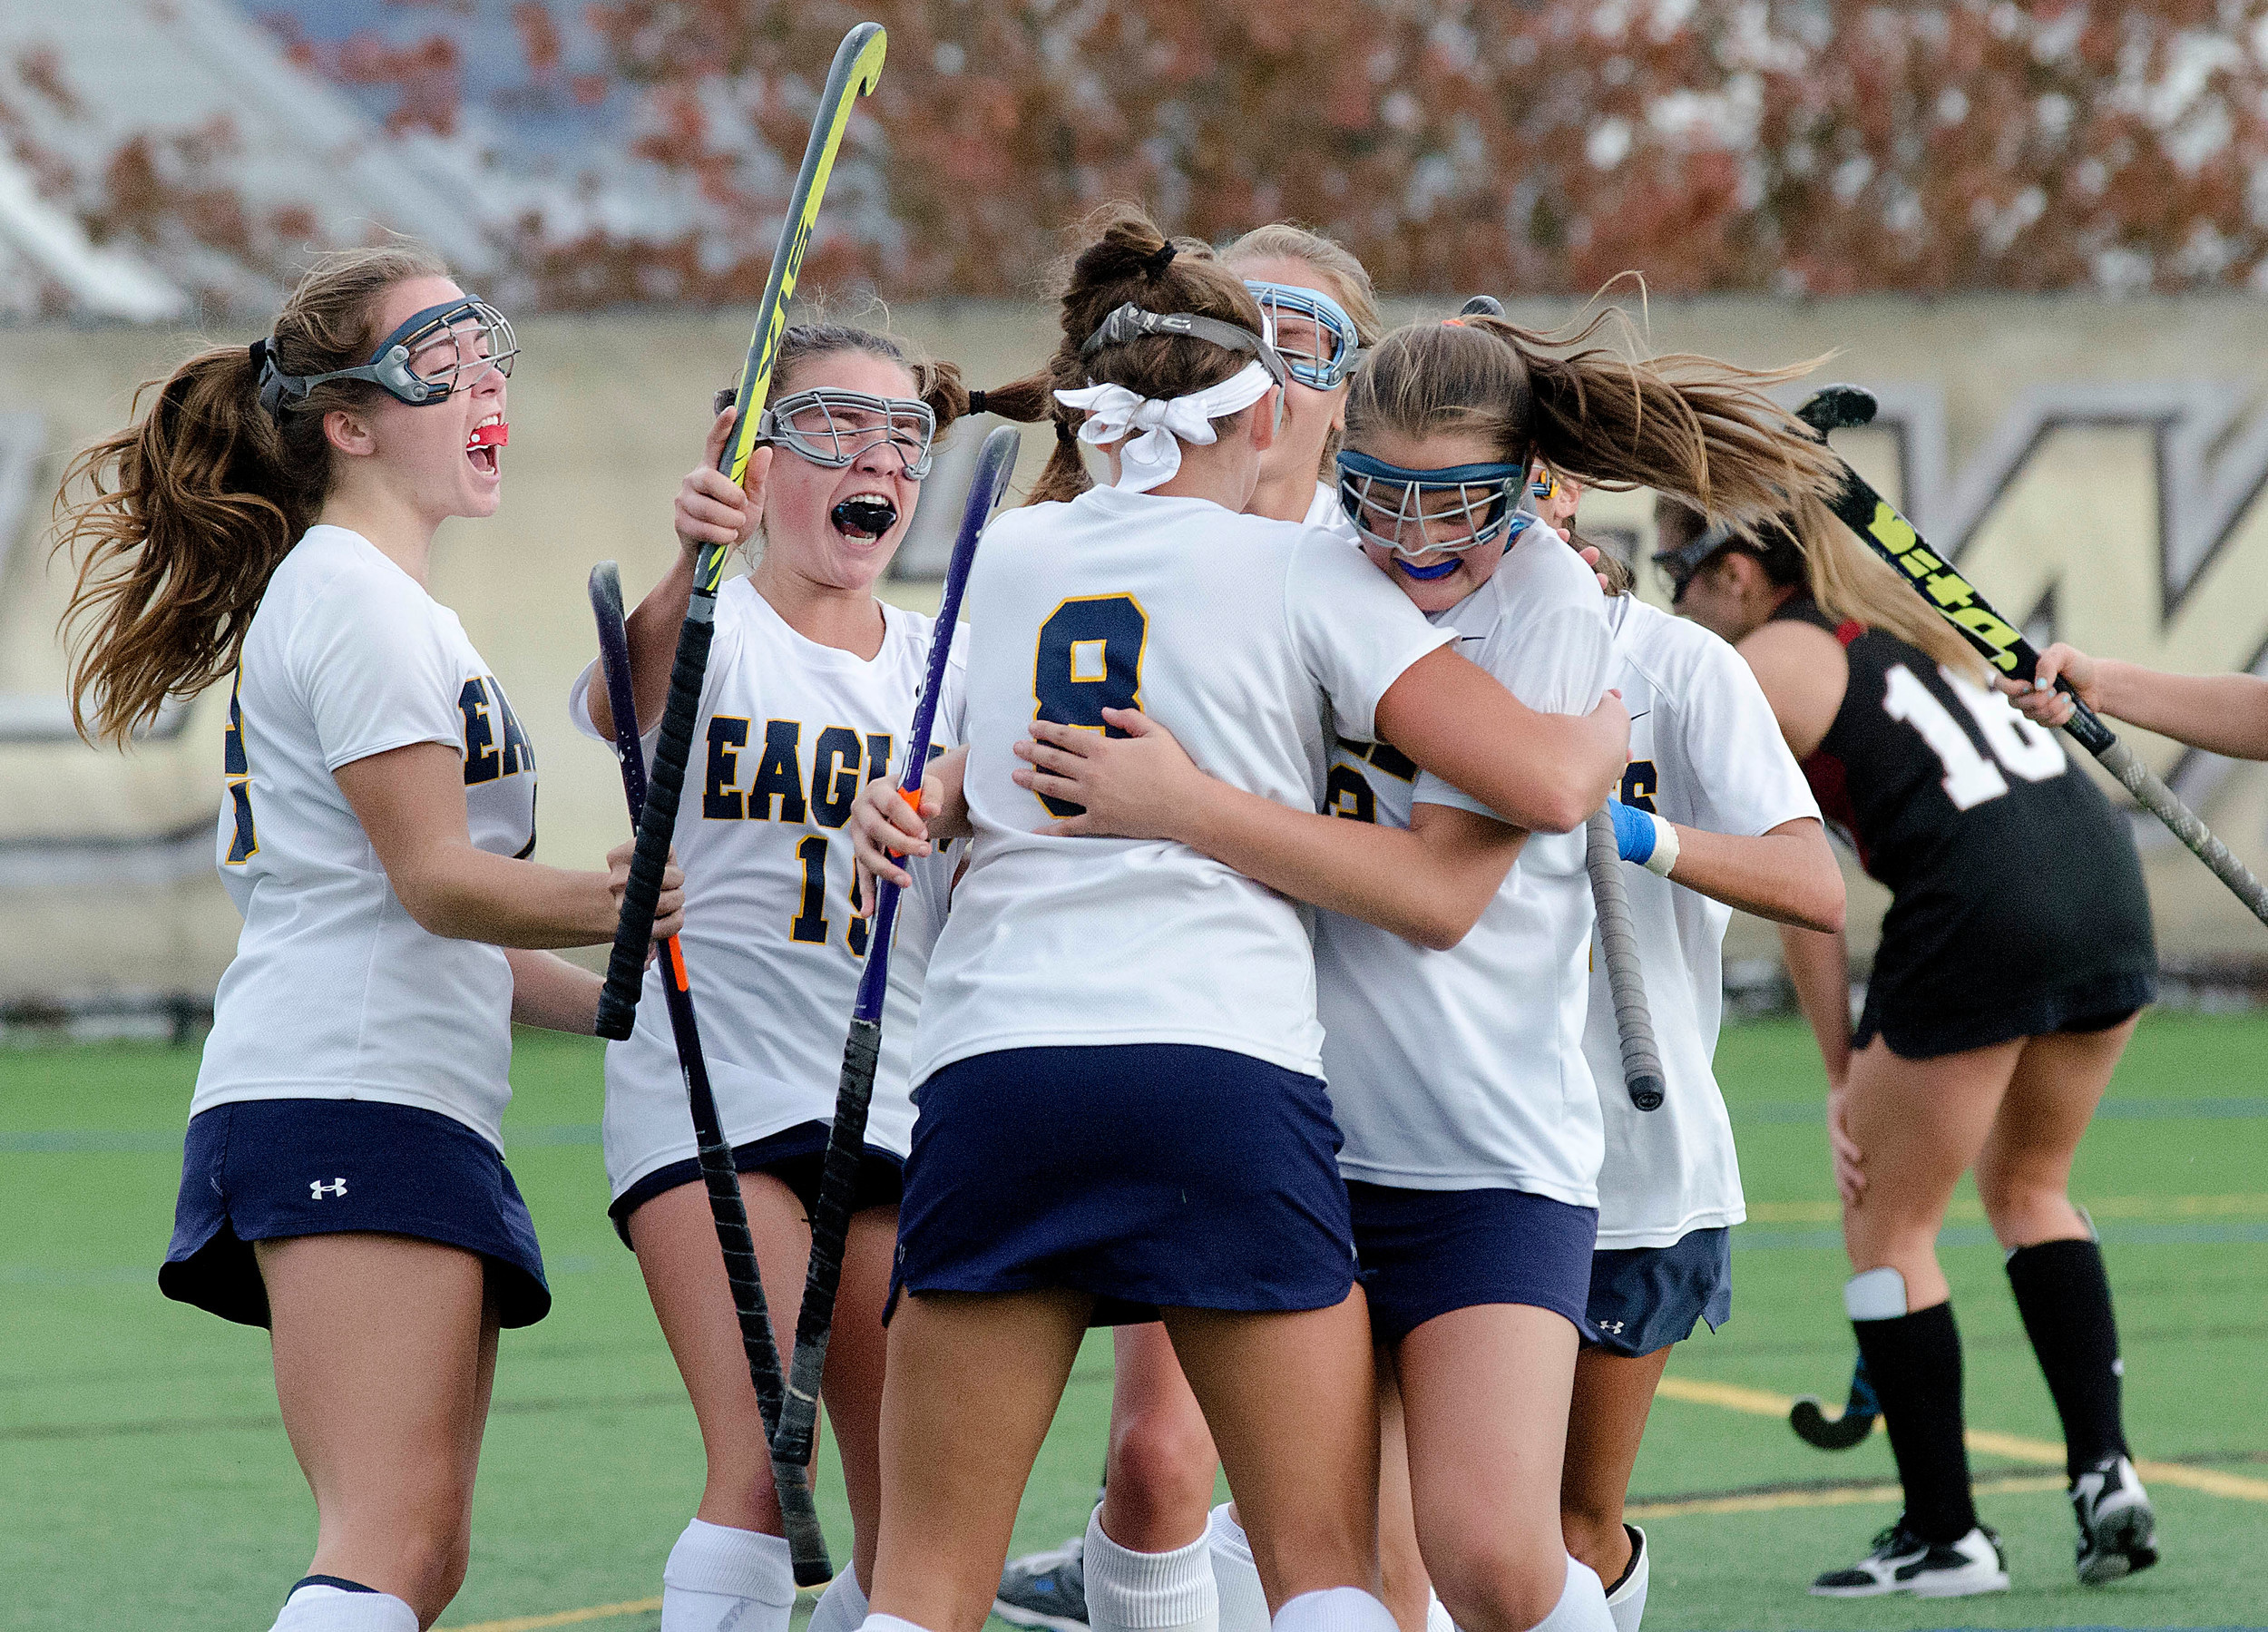 The Eagles celebrate a goal by Maddy Cox (right).